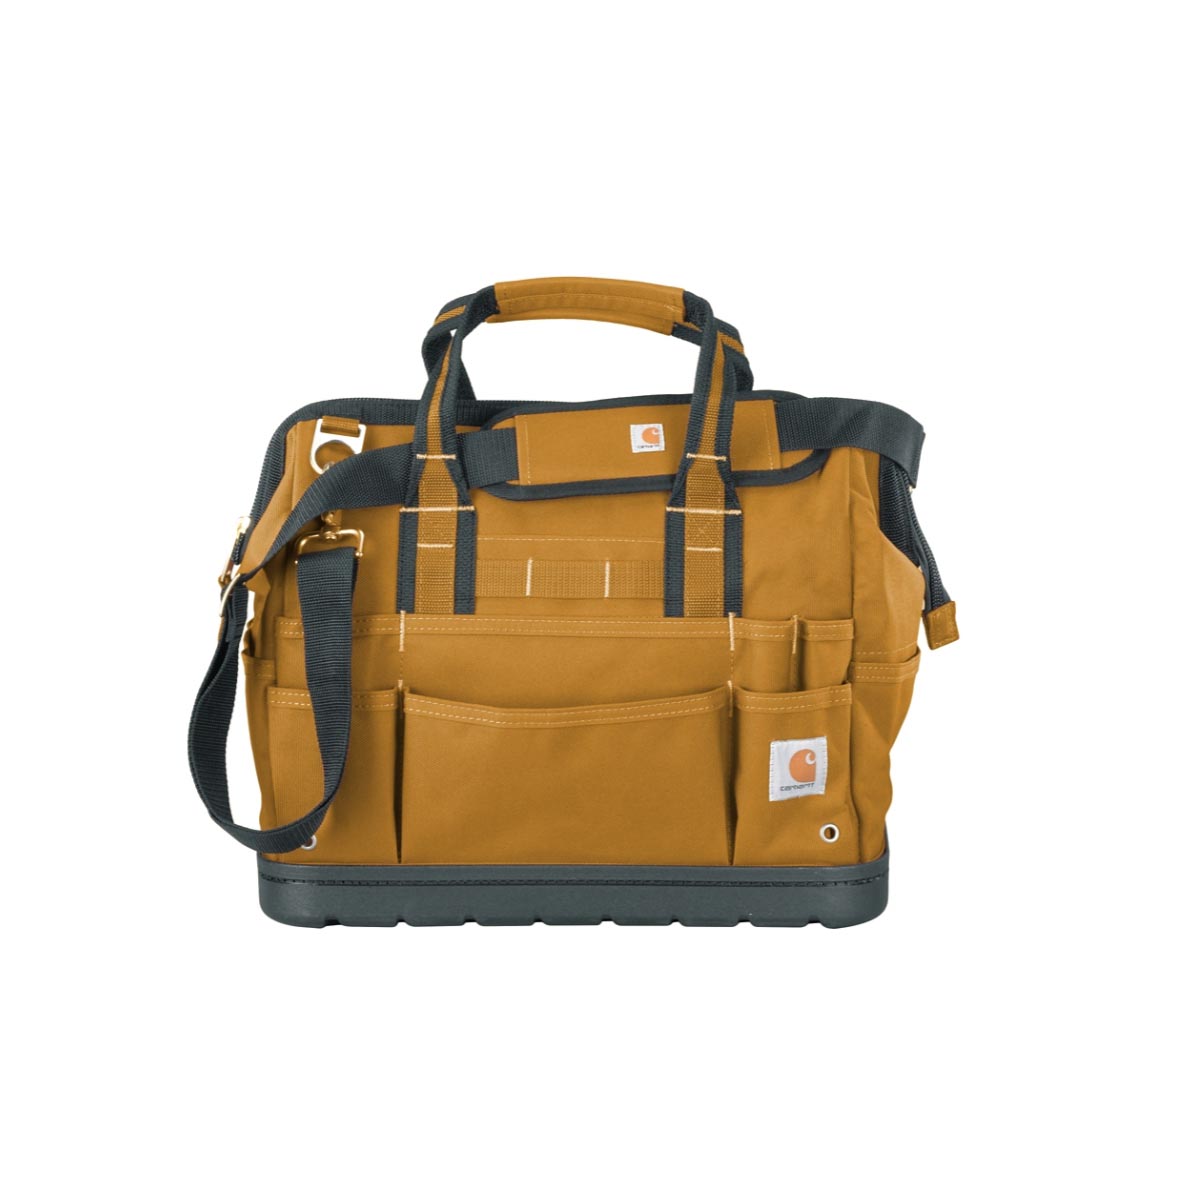 Carhartt Legacy 16 Inch Tool Bag with Molded Base